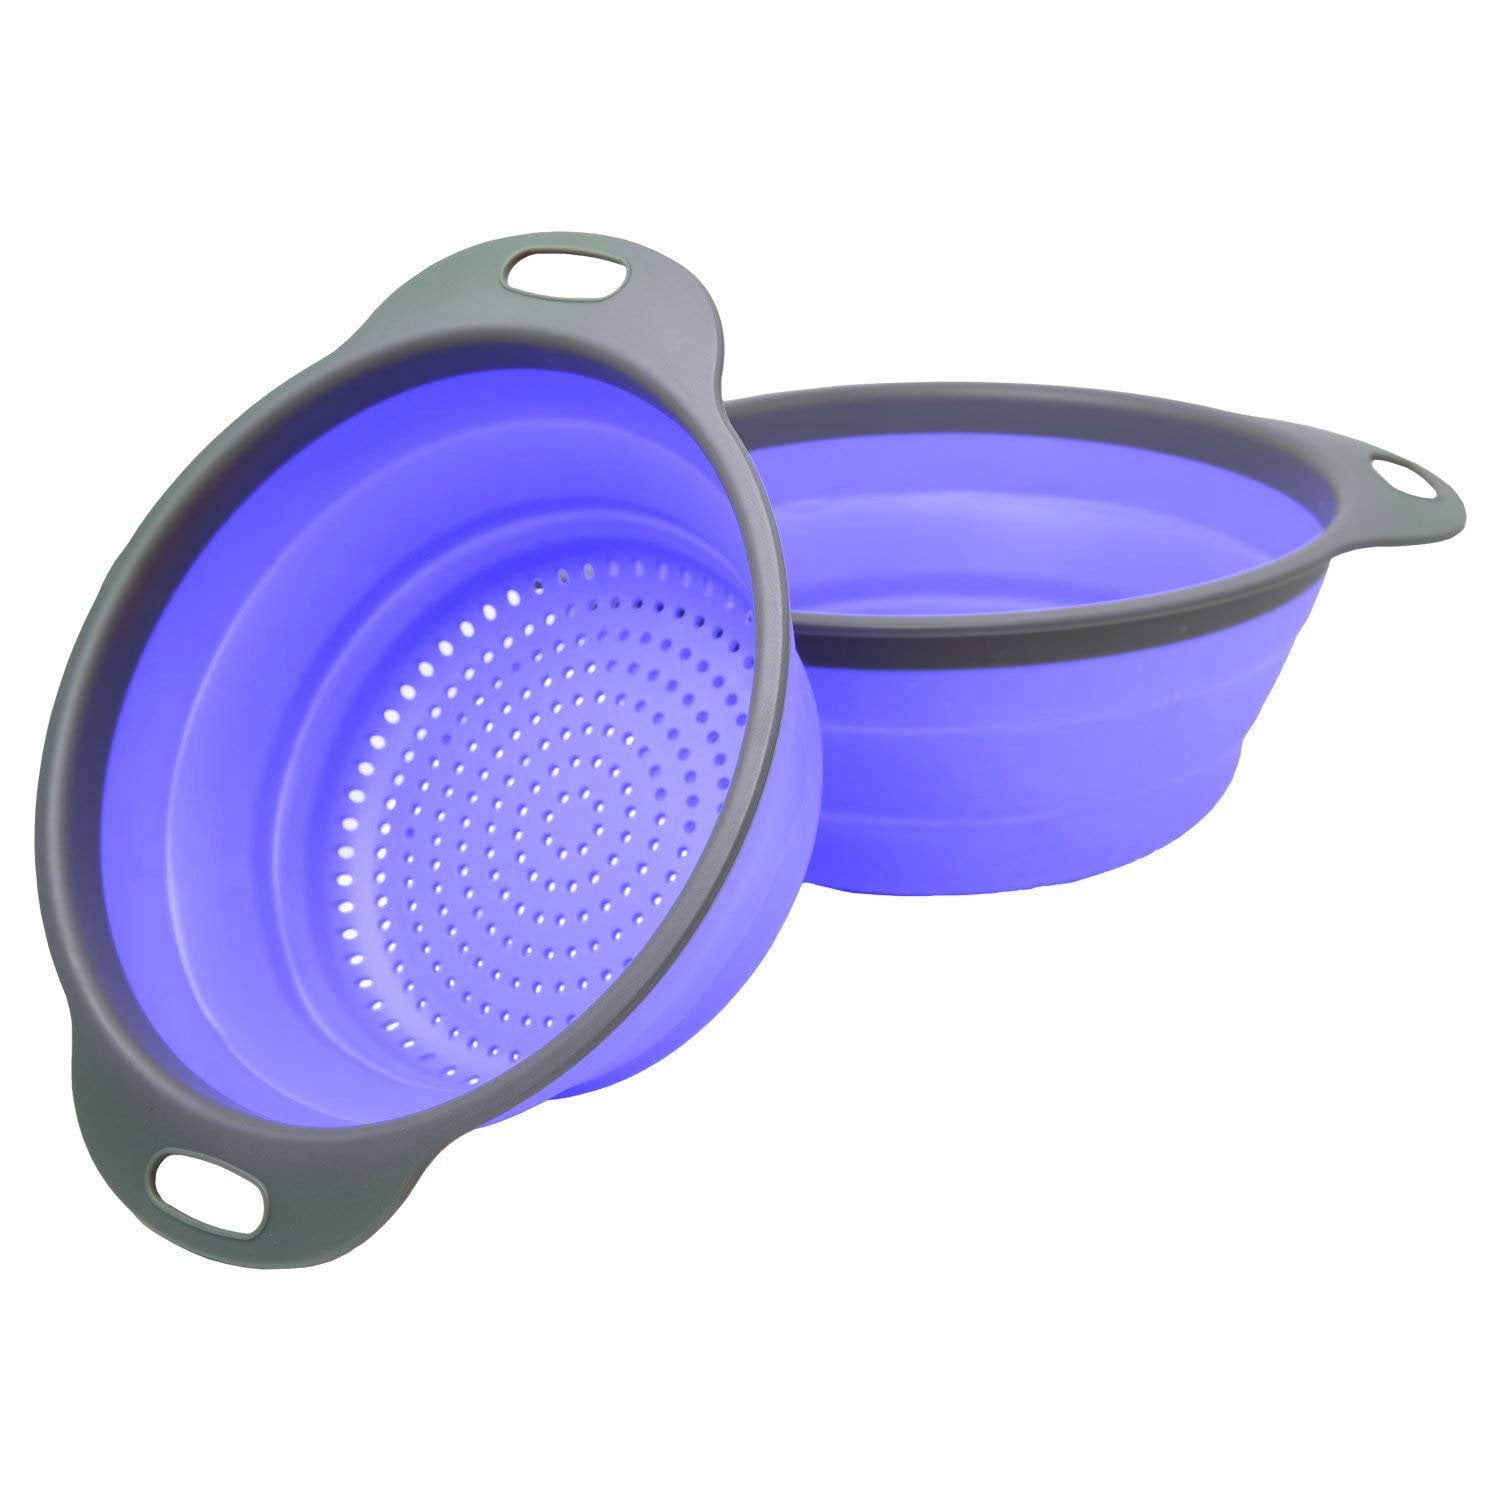 Collapsible Colander Strainer Set for Kitchen Blue and Silver, 2 Pack